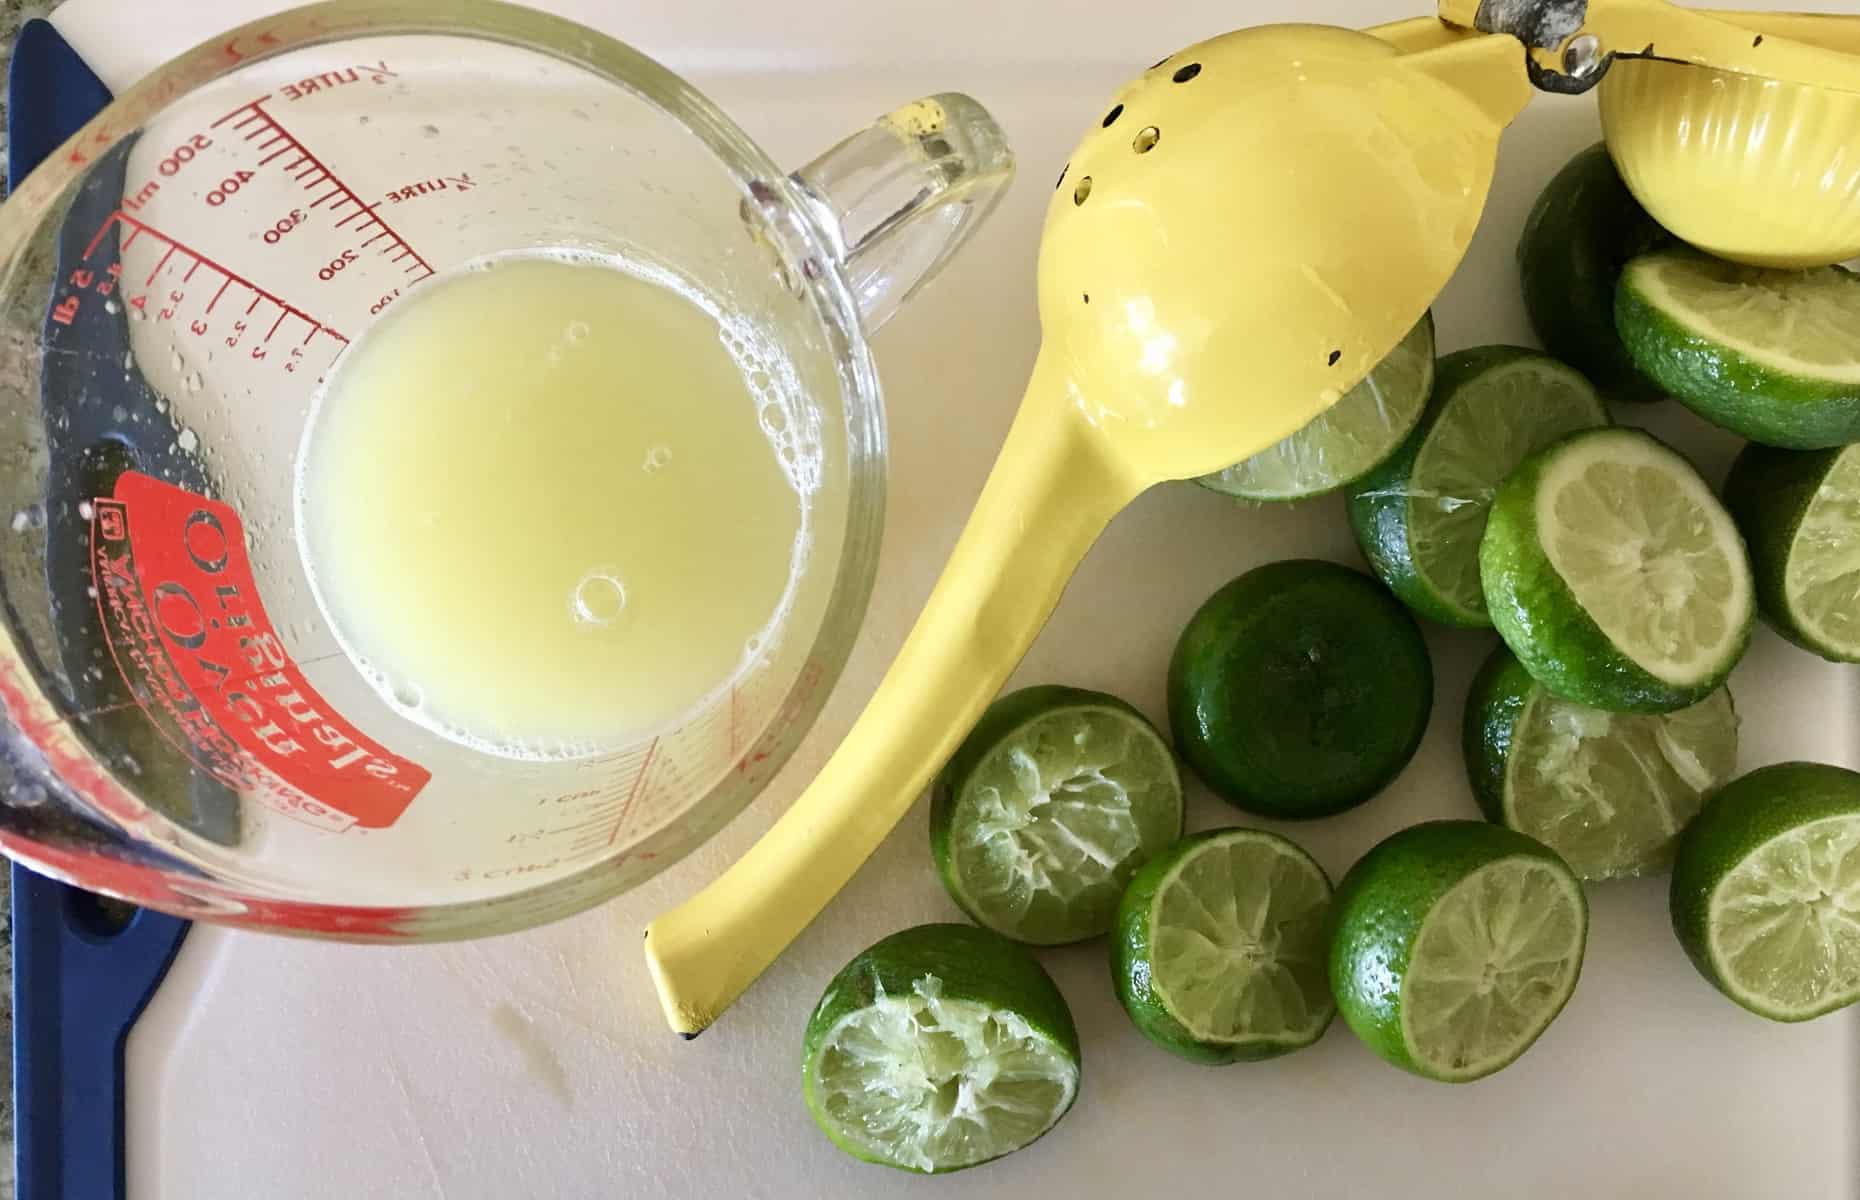 cutting board with limes and lime juice on it.